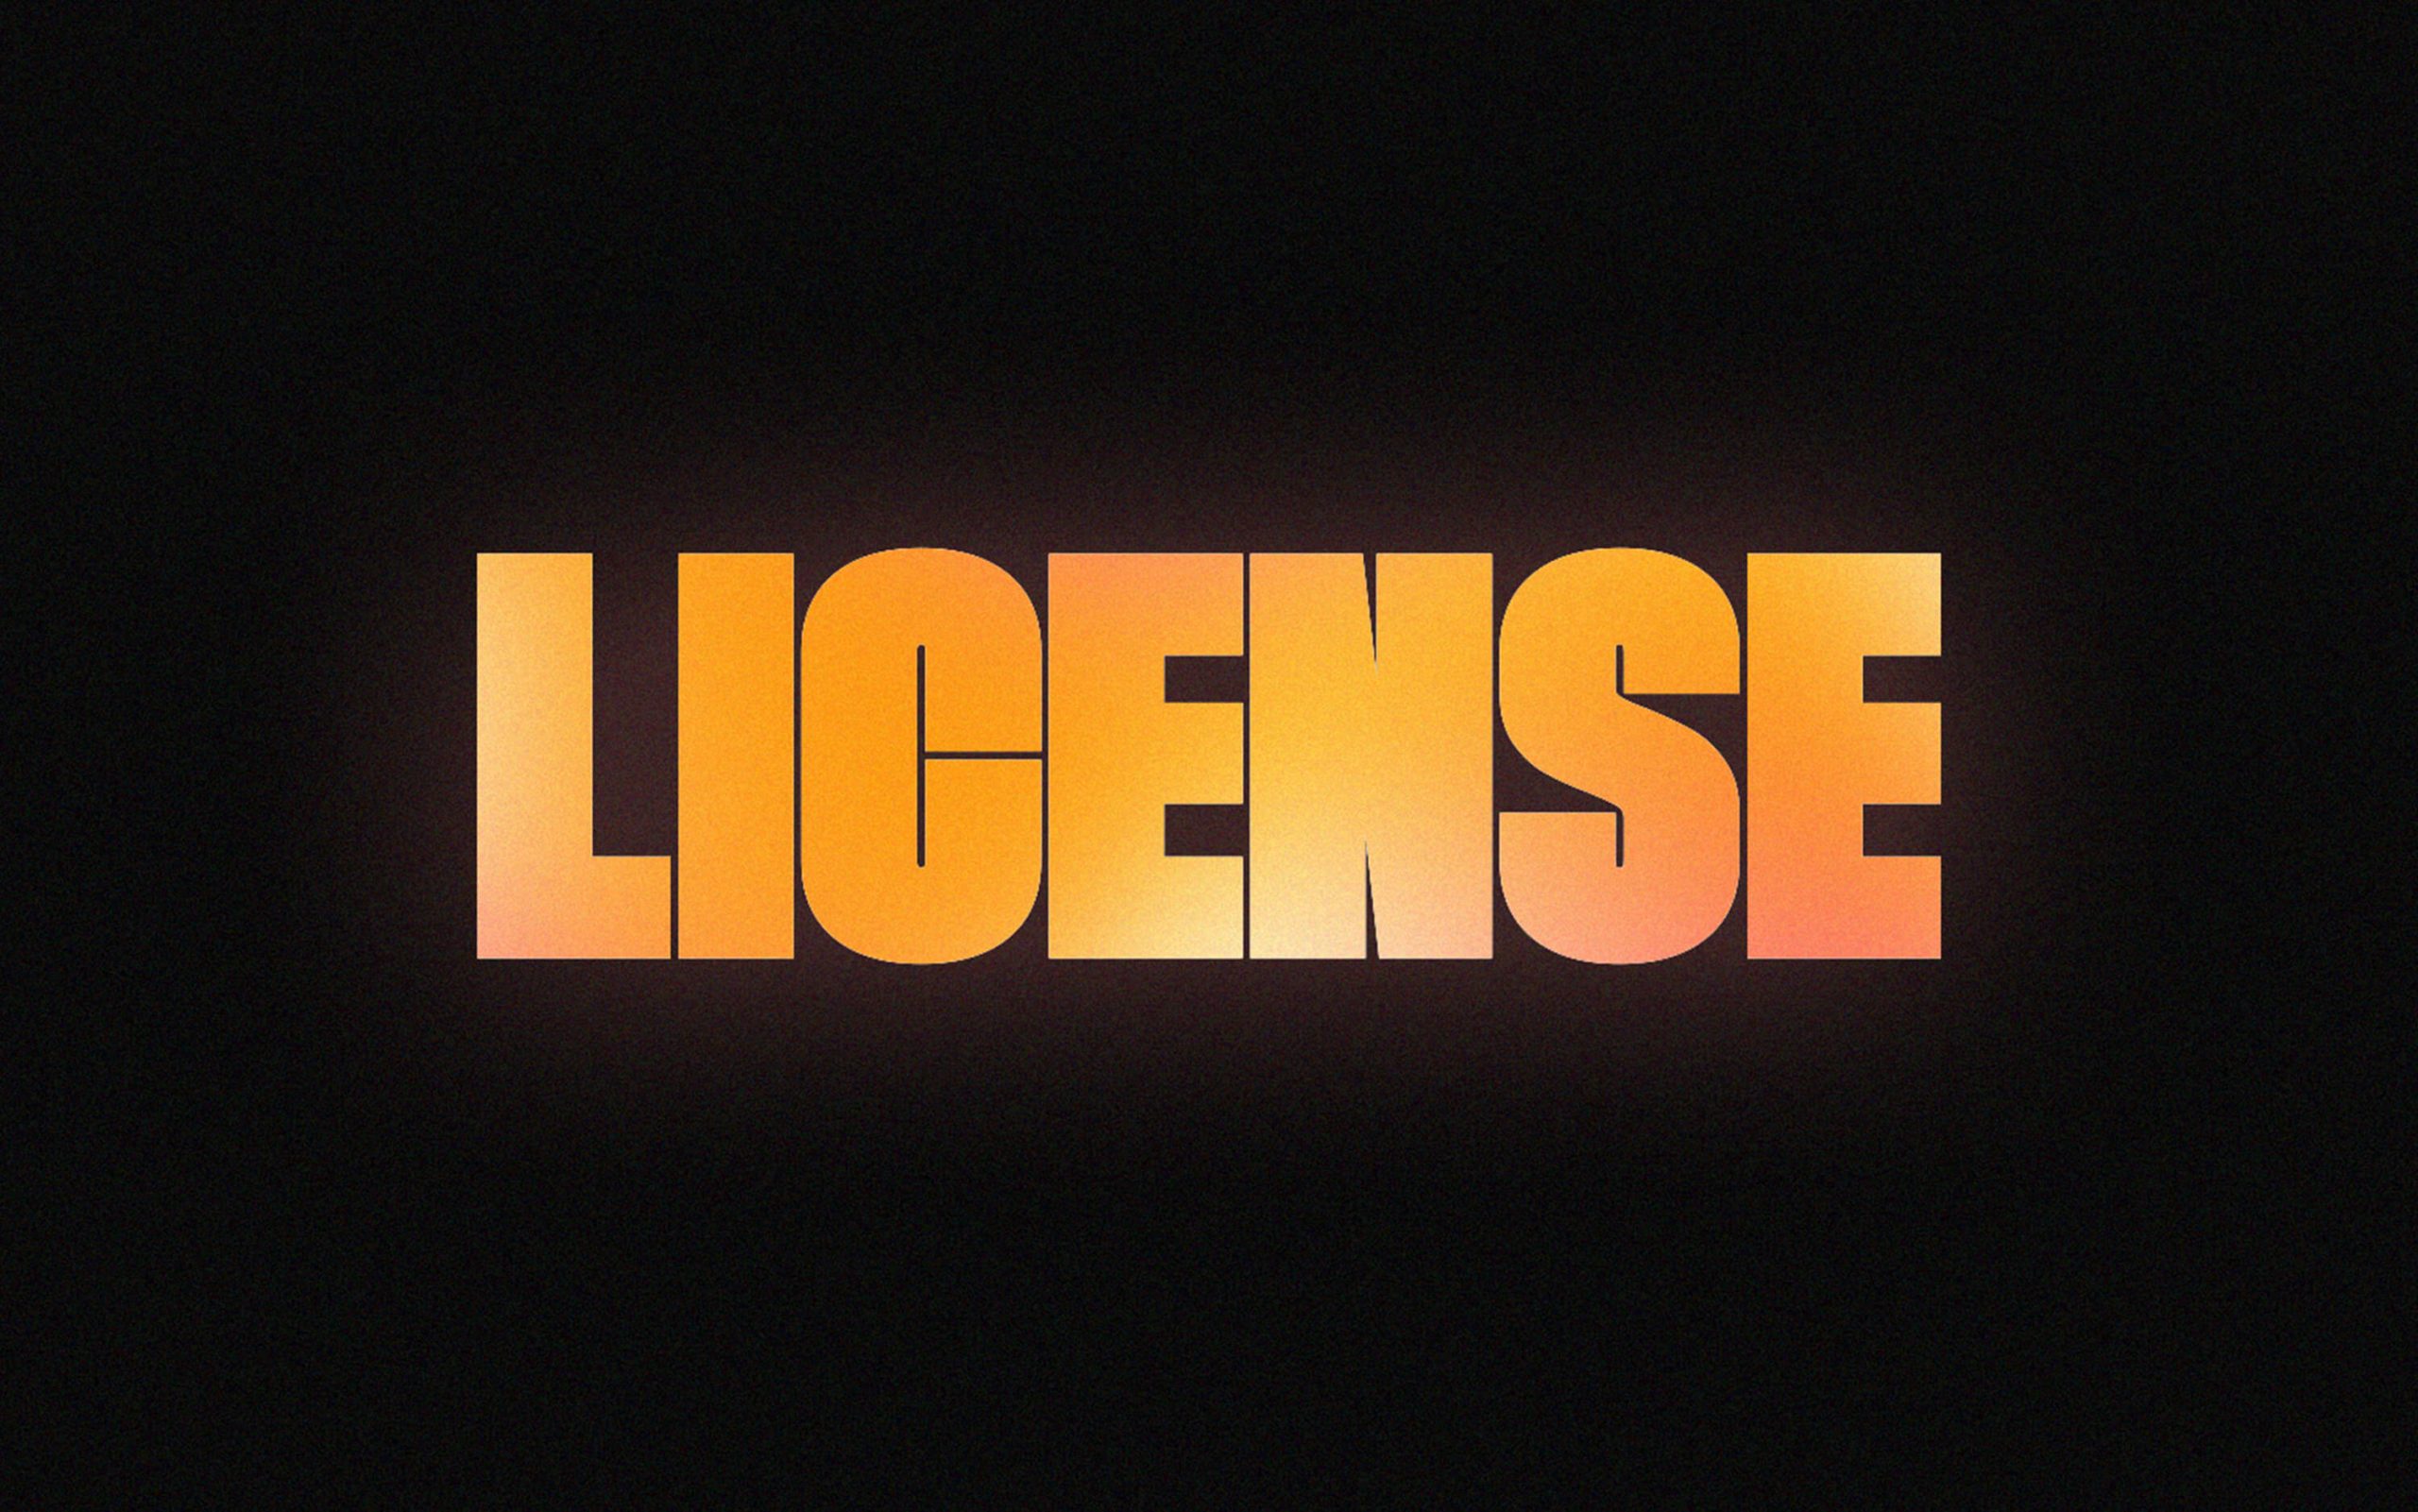 Featured image of License, a short motion story